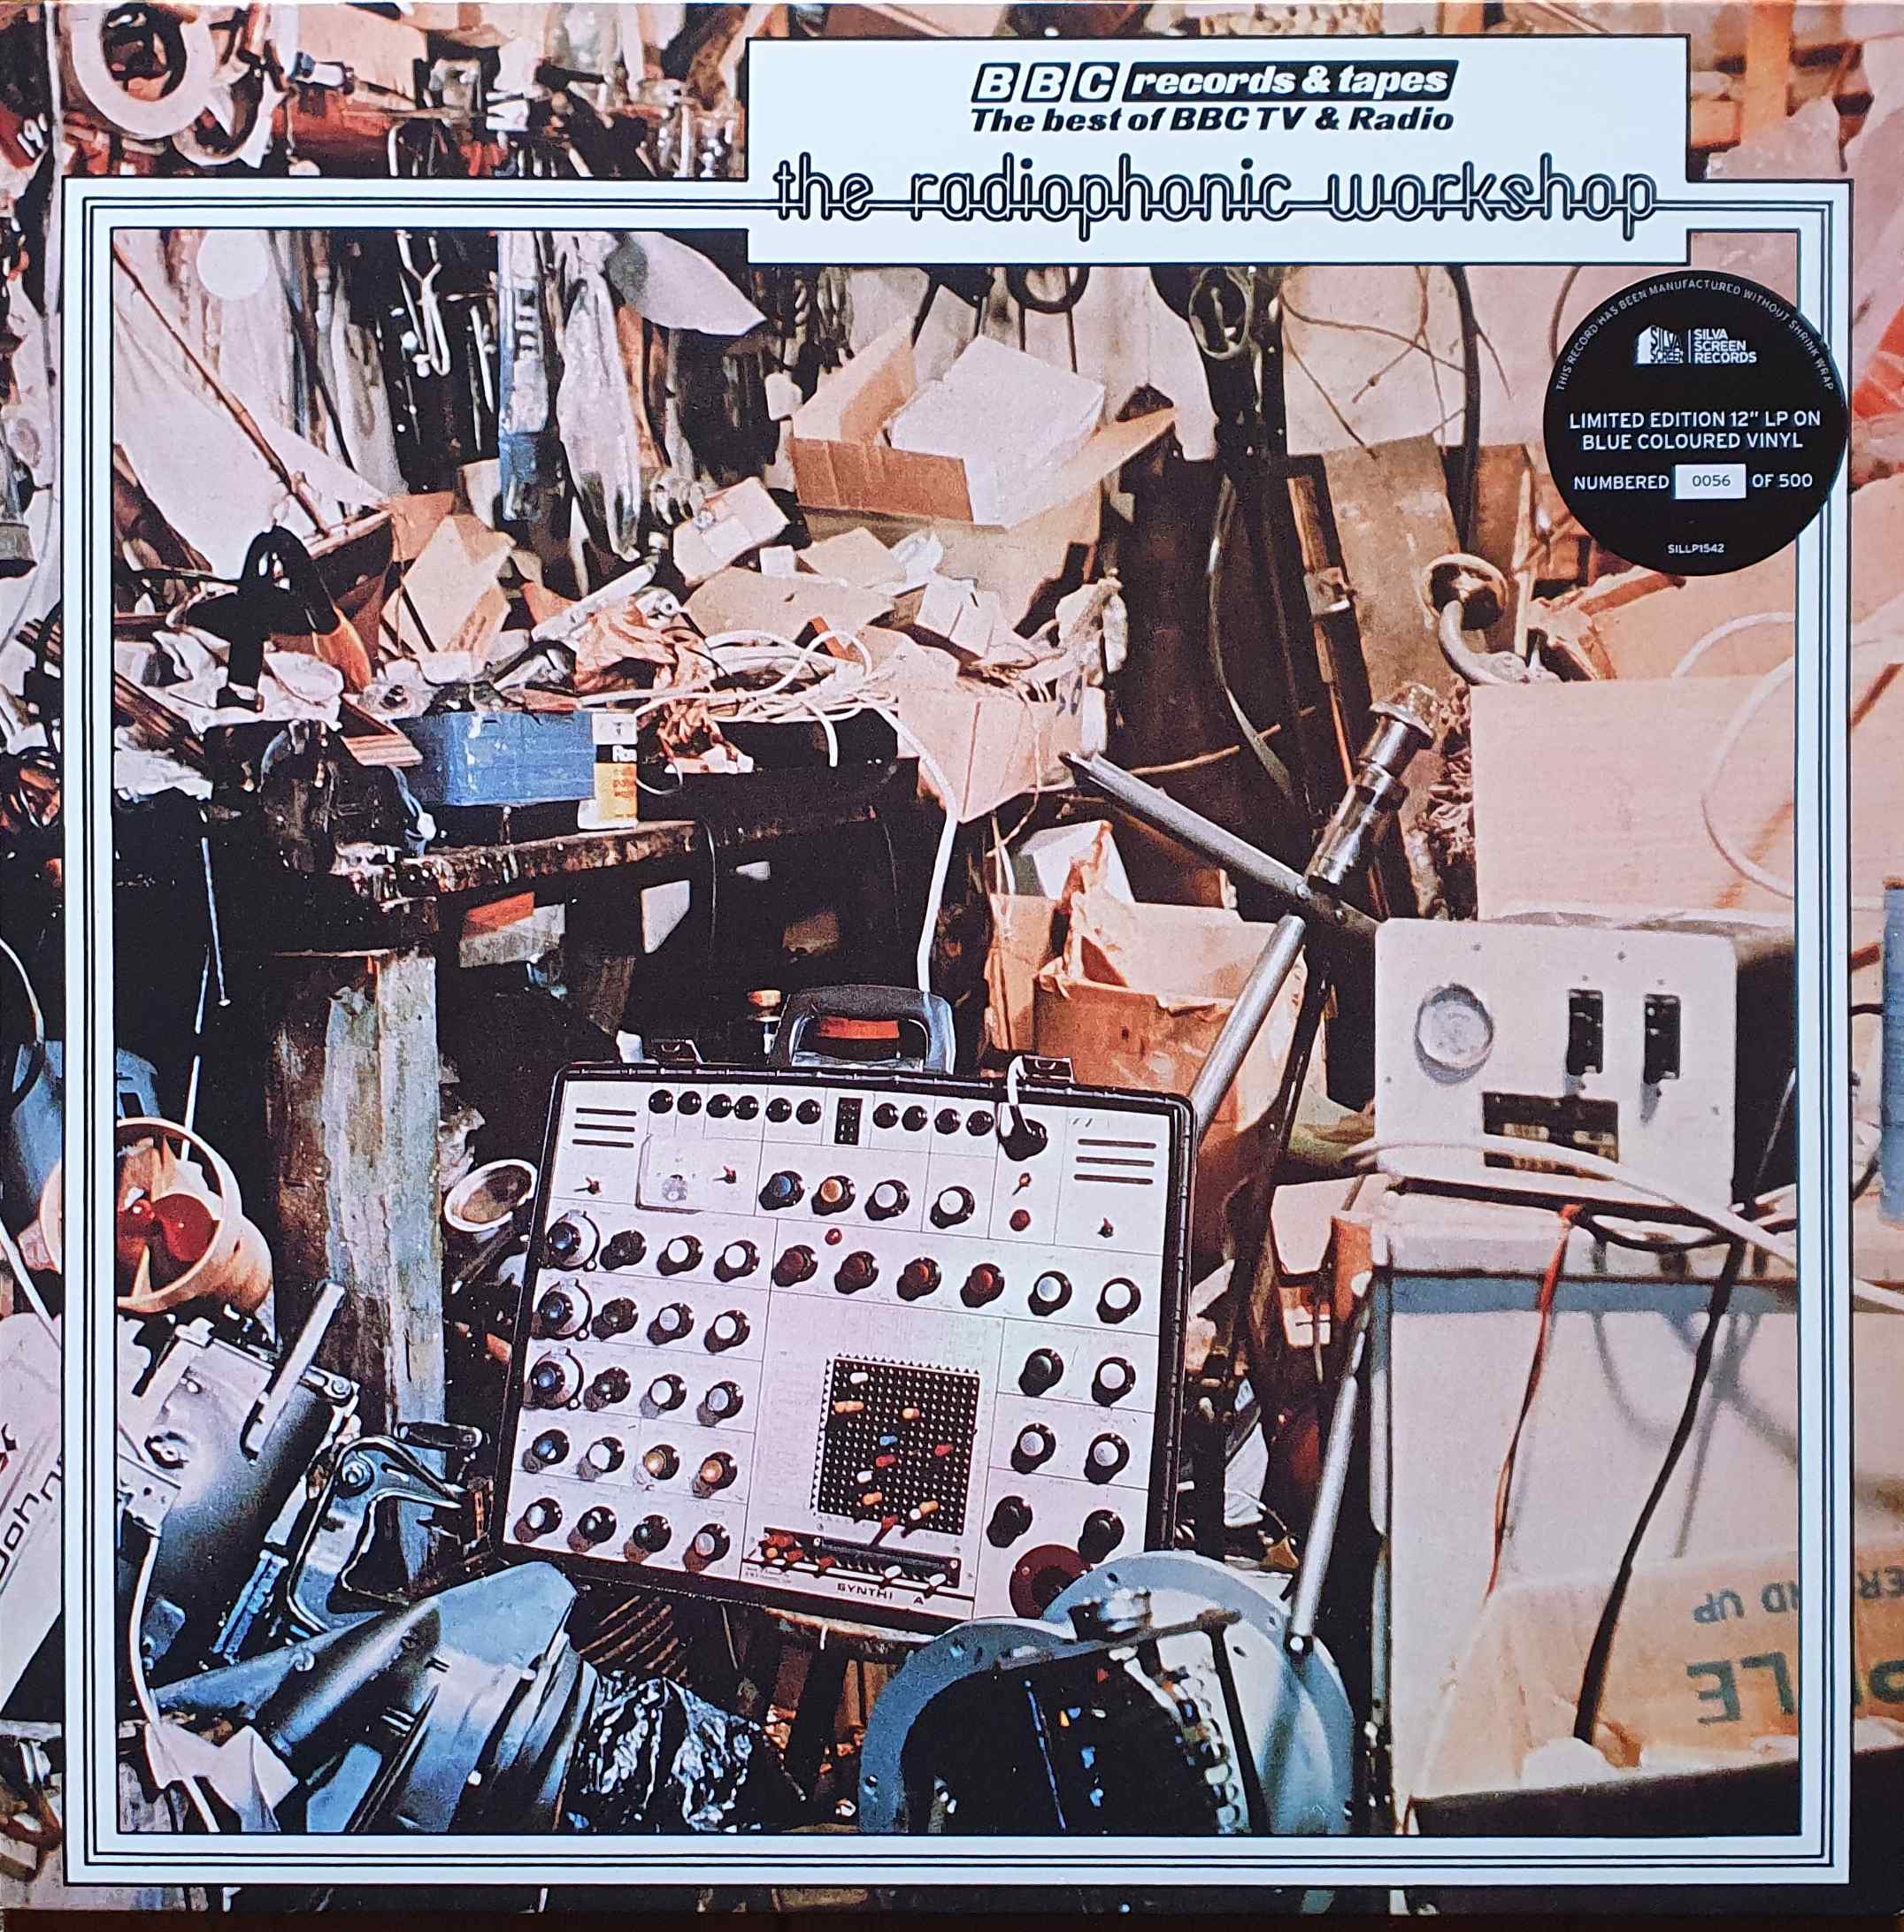 Picture of SILLP 1542 The Radiophonic Workshop by artist Various from the BBC records and Tapes library